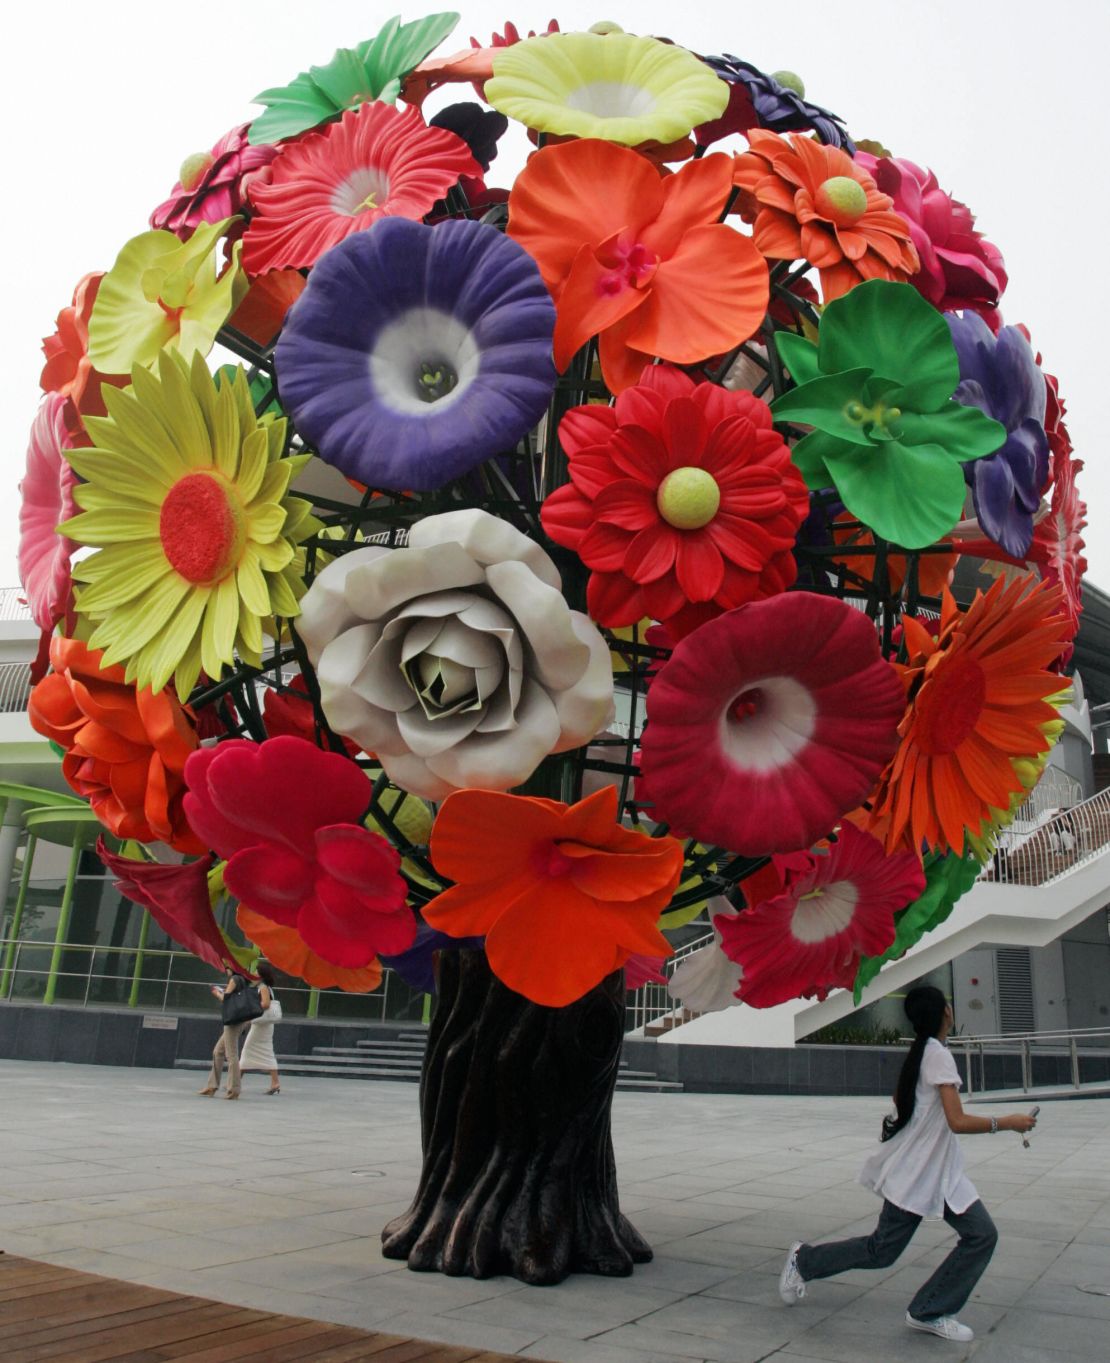 "Flower Tree" by artist Choi Jeong-Hwa unveiled at VivoCity in conjunction with Singapore Biennale in 2006.